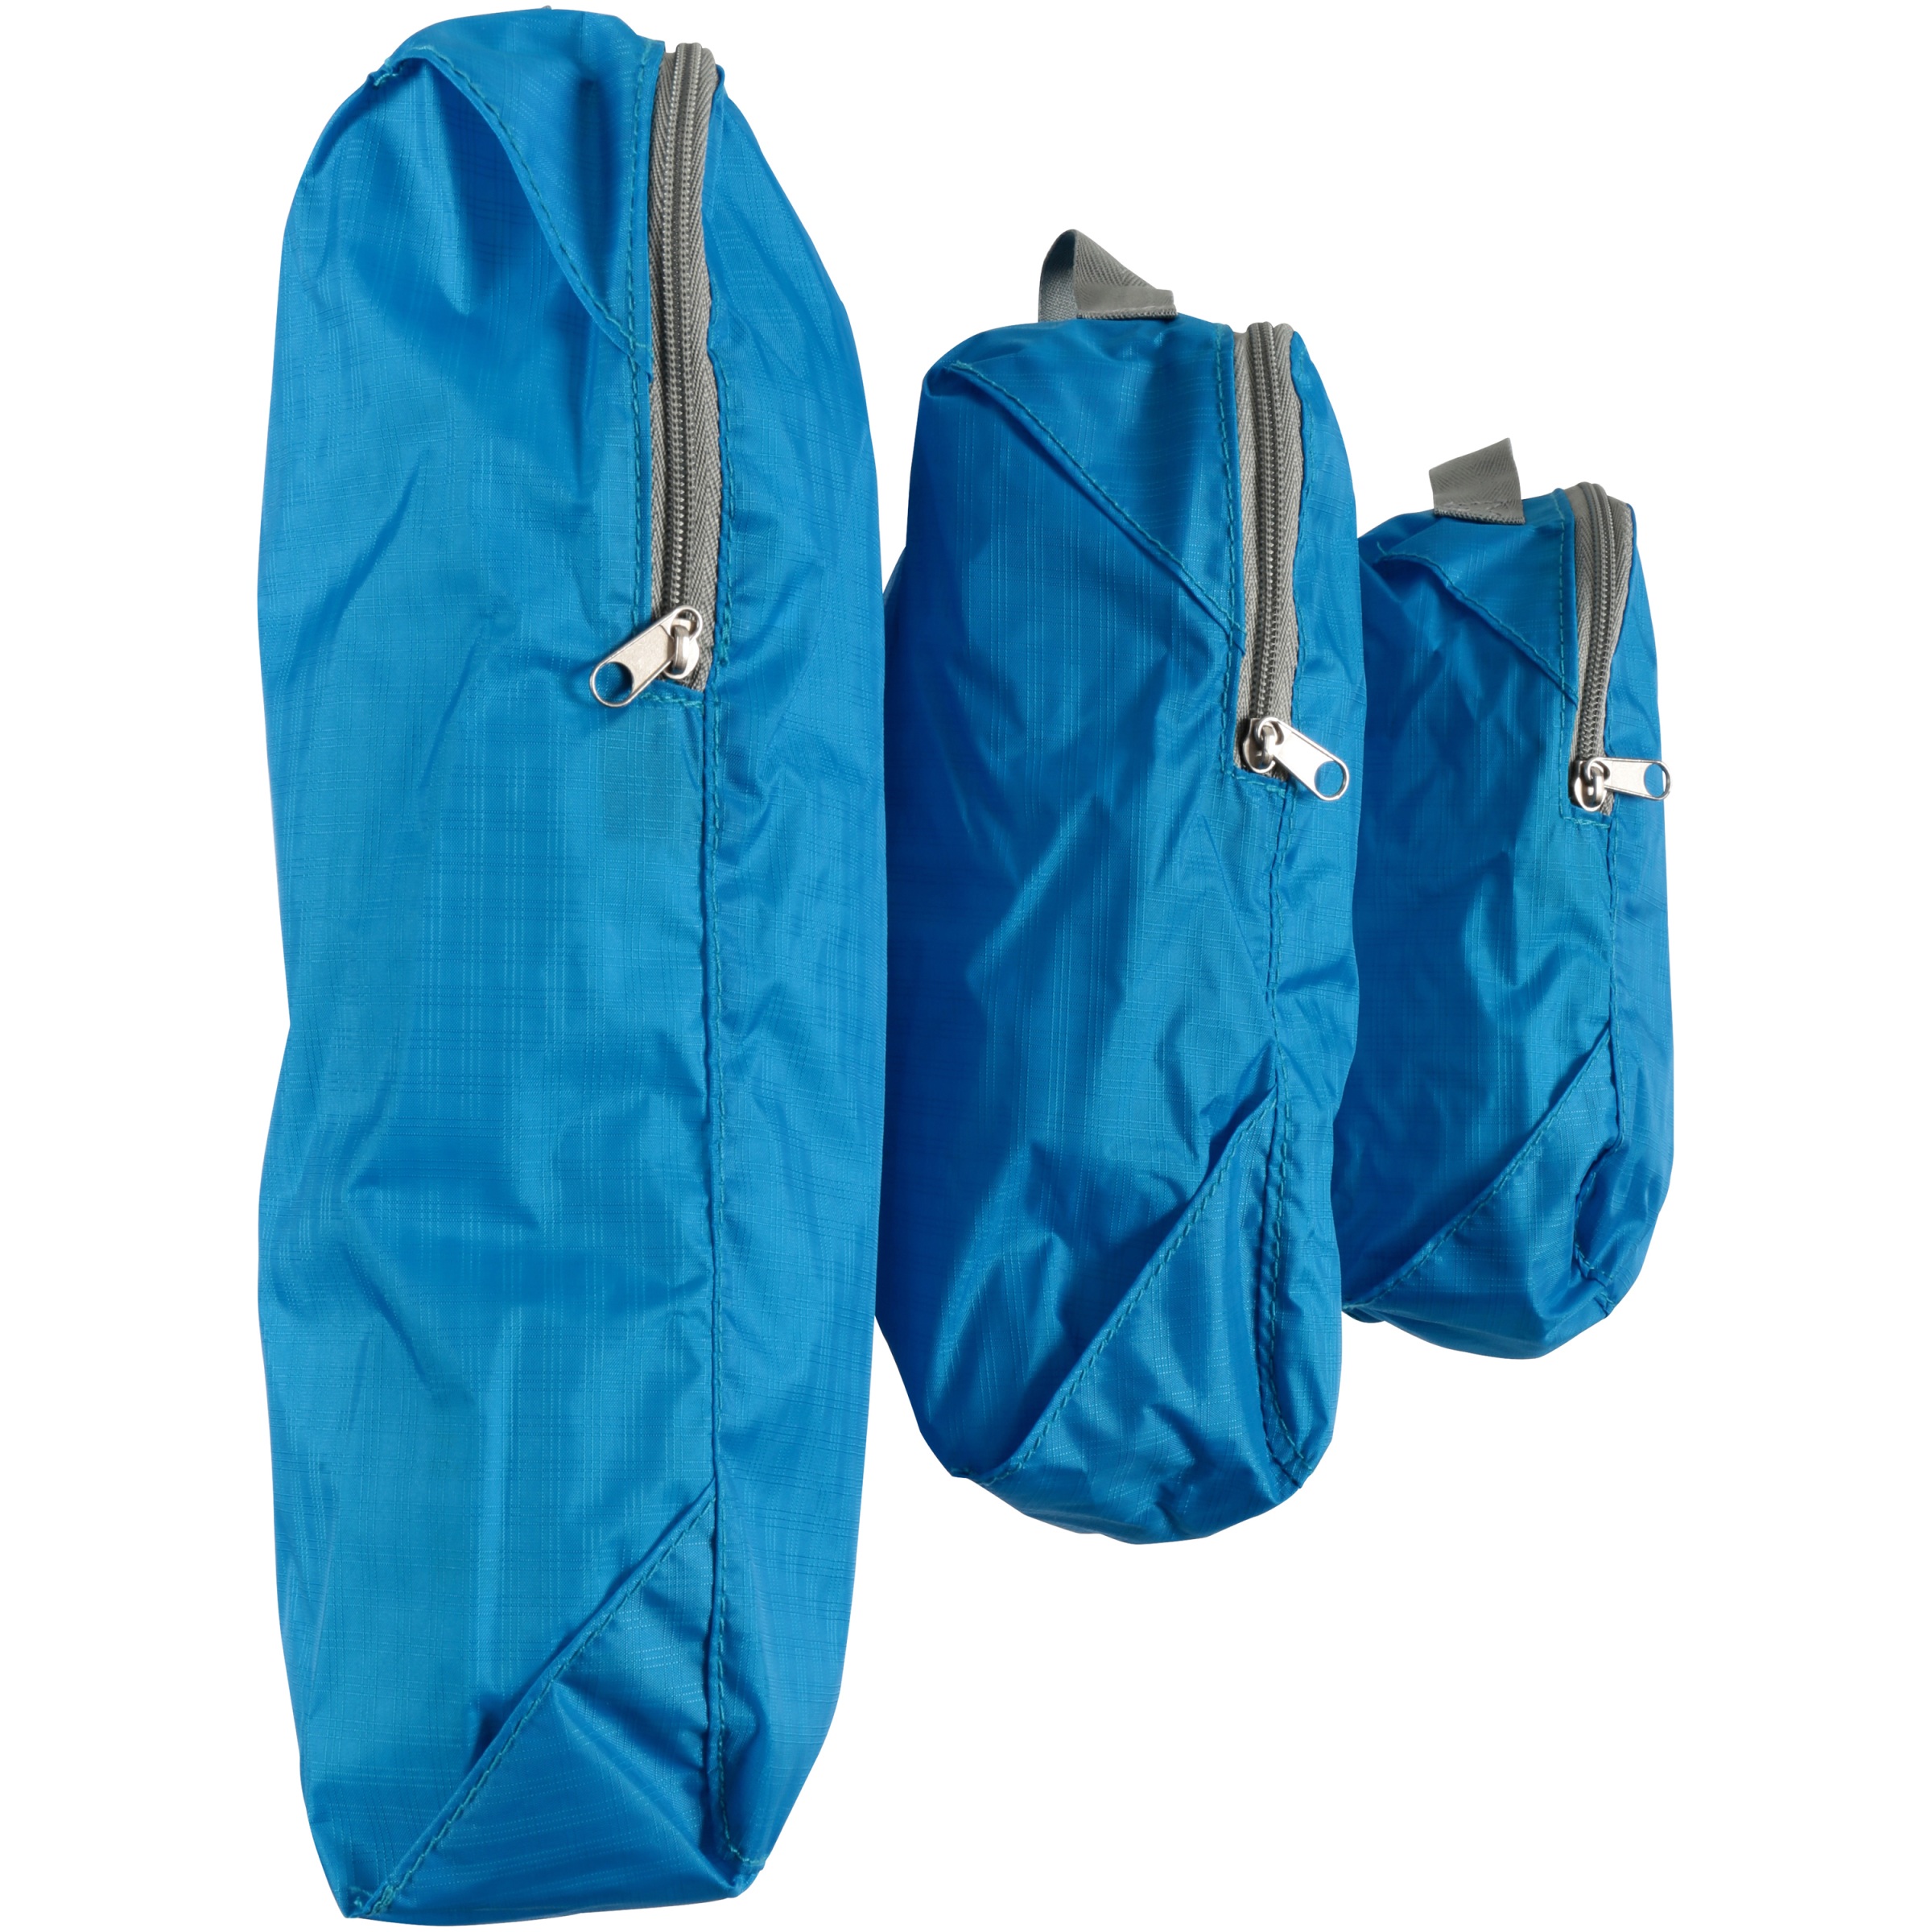 Ozark Trail Packing Cubes, 3pc Set - image 3 of 3